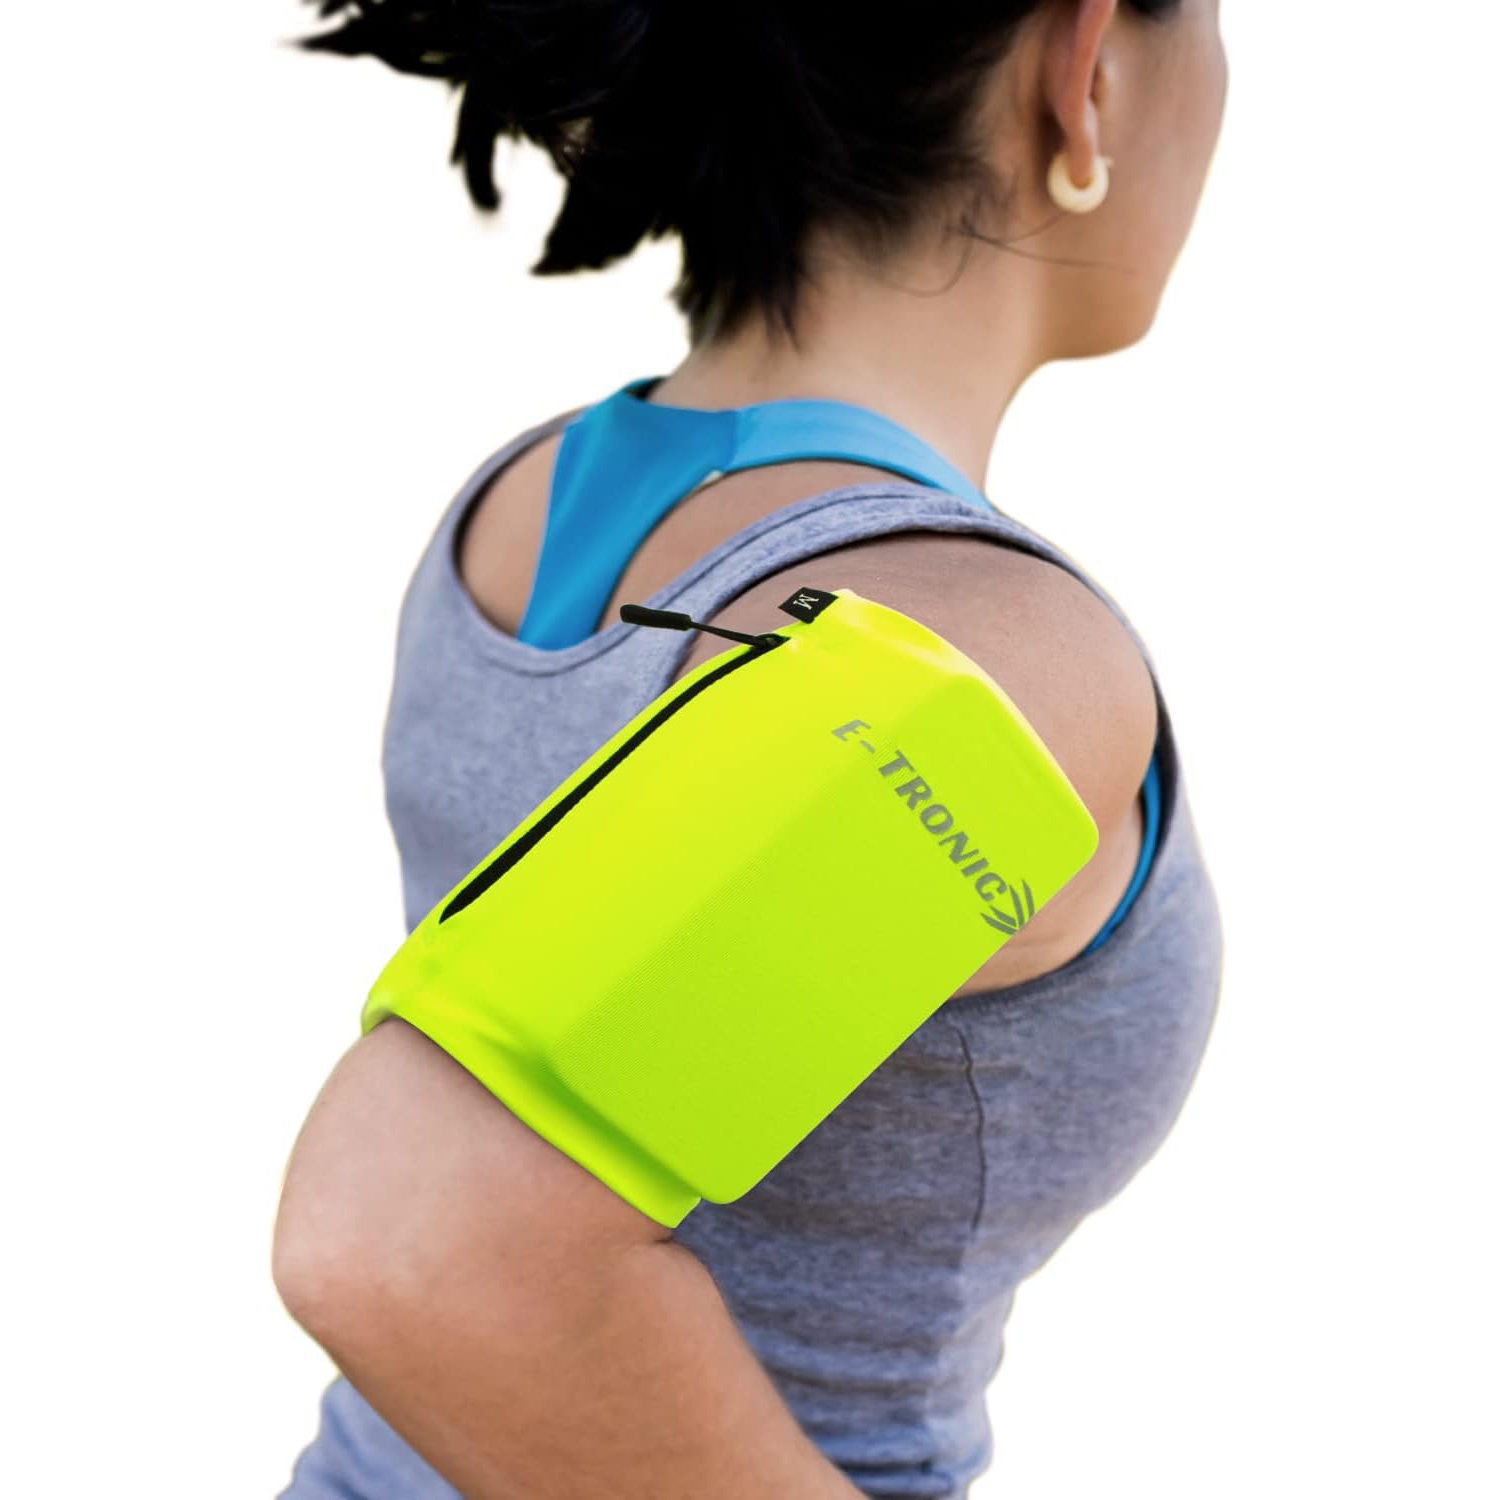 Phone Armband Sleeve: Best Running Sports Arm Band Strap Holder Pouch Case for Exercise Workout Fits iPhone 5S SE 6 6S